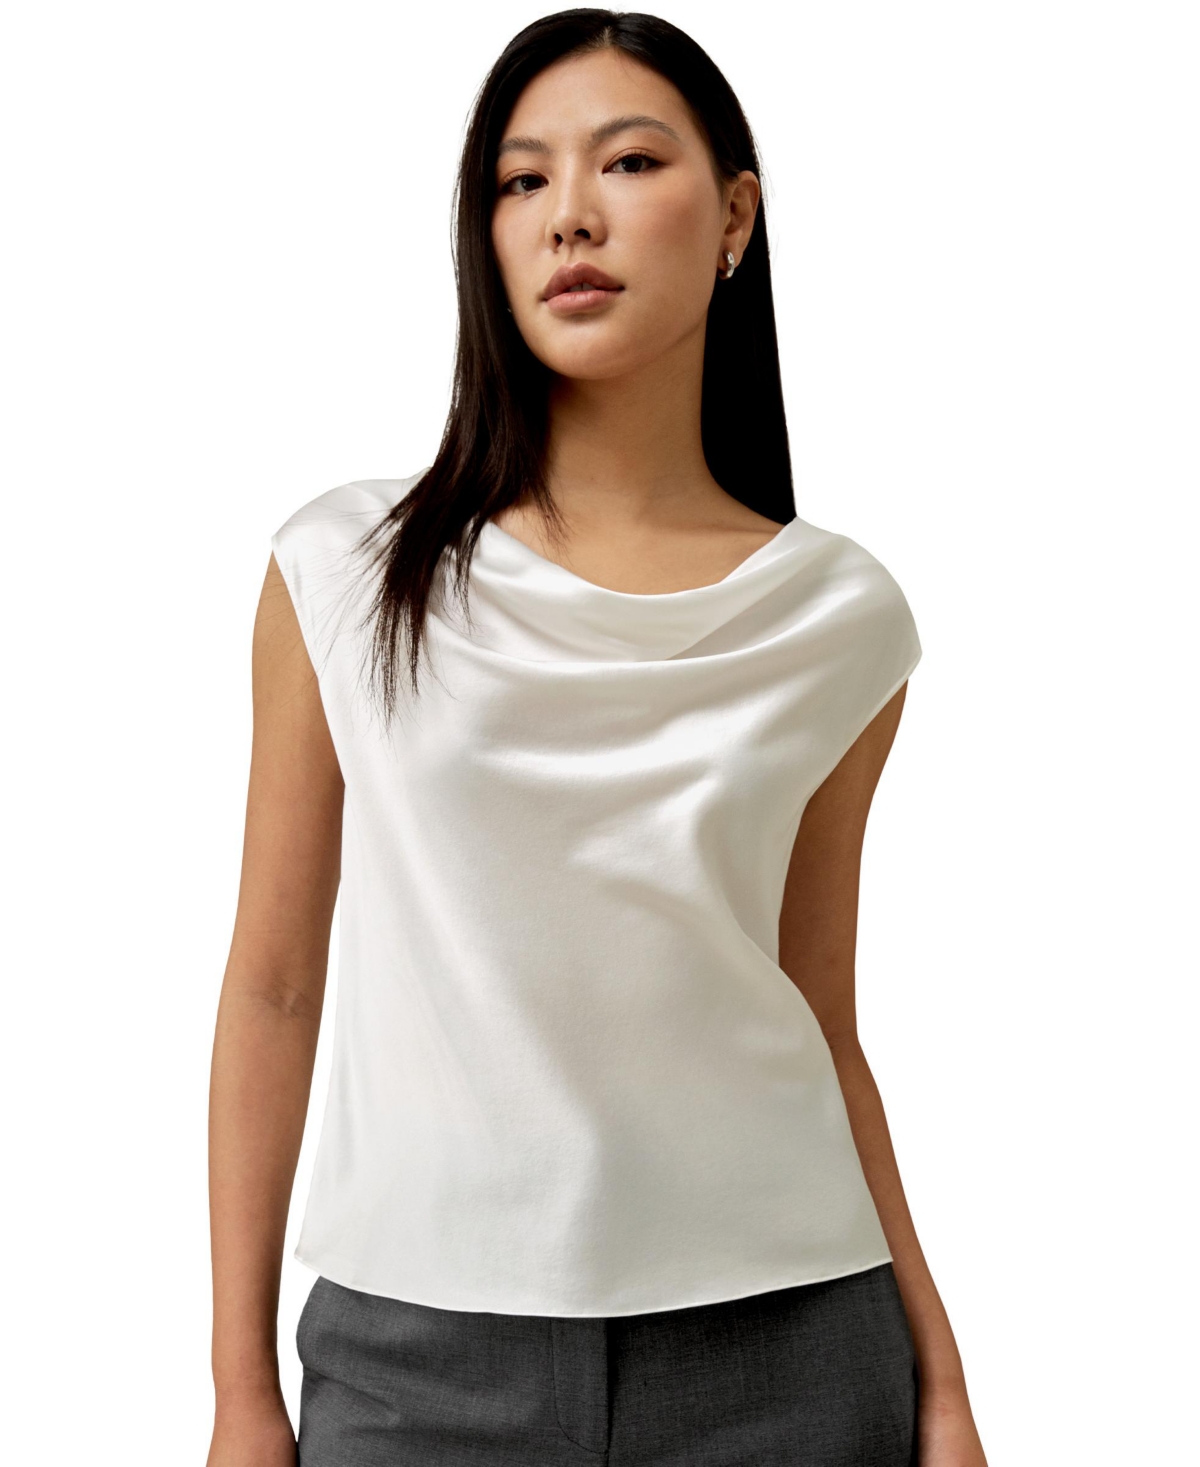 Women's Silk Charmeuse Cowl Neck Top for Women - Natural white